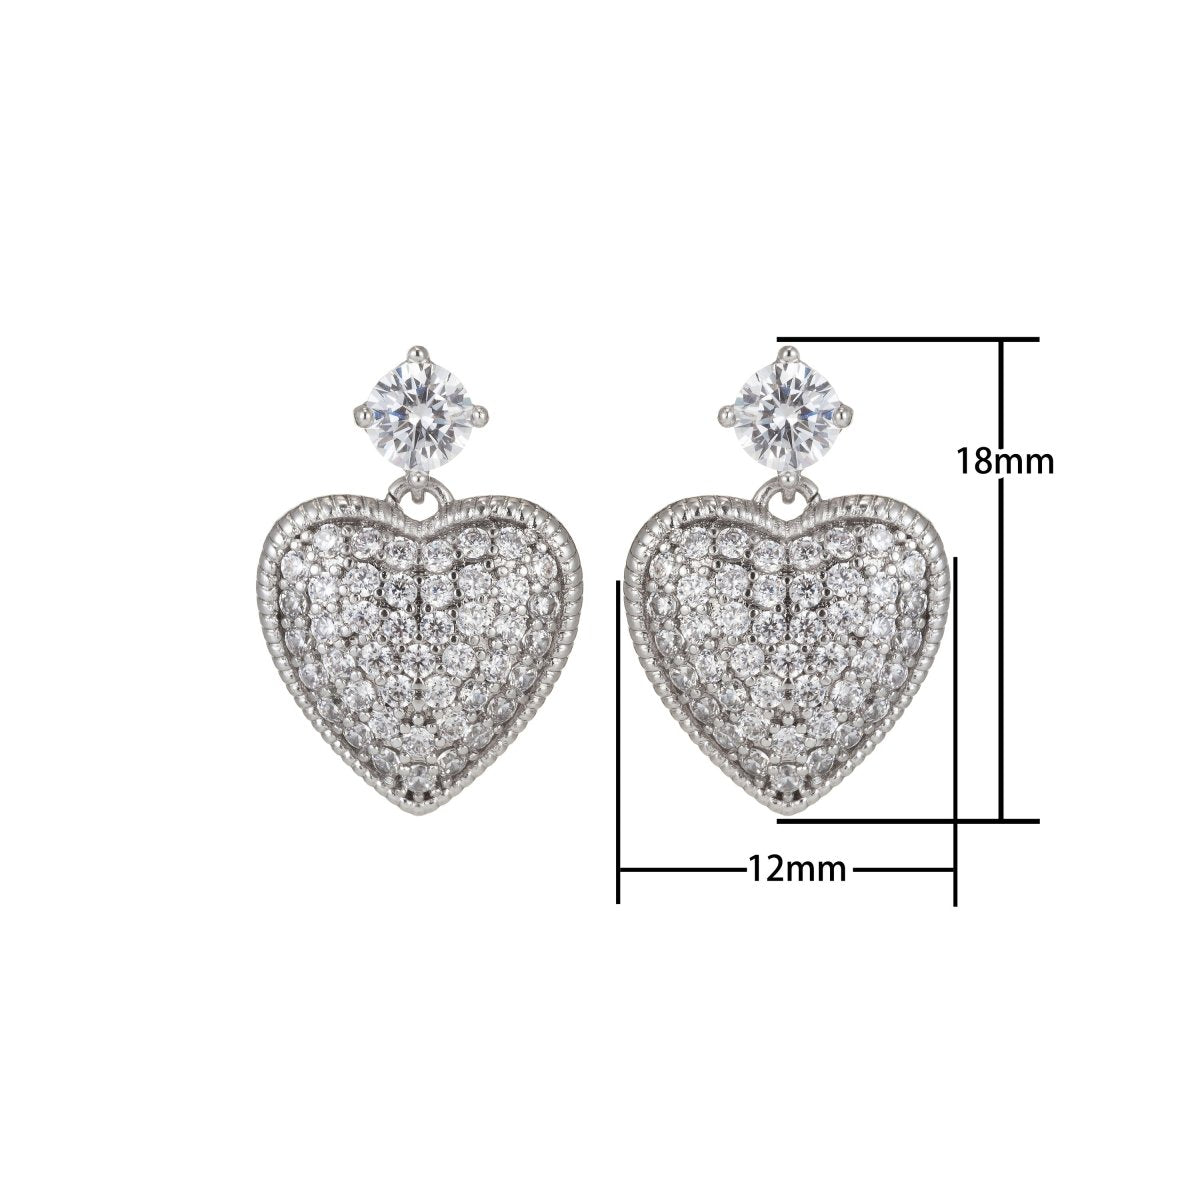 Silver Heart Stud Earrings, CZ Micro Pave Stud Earrings, Stud Earrings, Cubic Zirconia Dangle Earrings for Gift Q-023 - DLUXCA